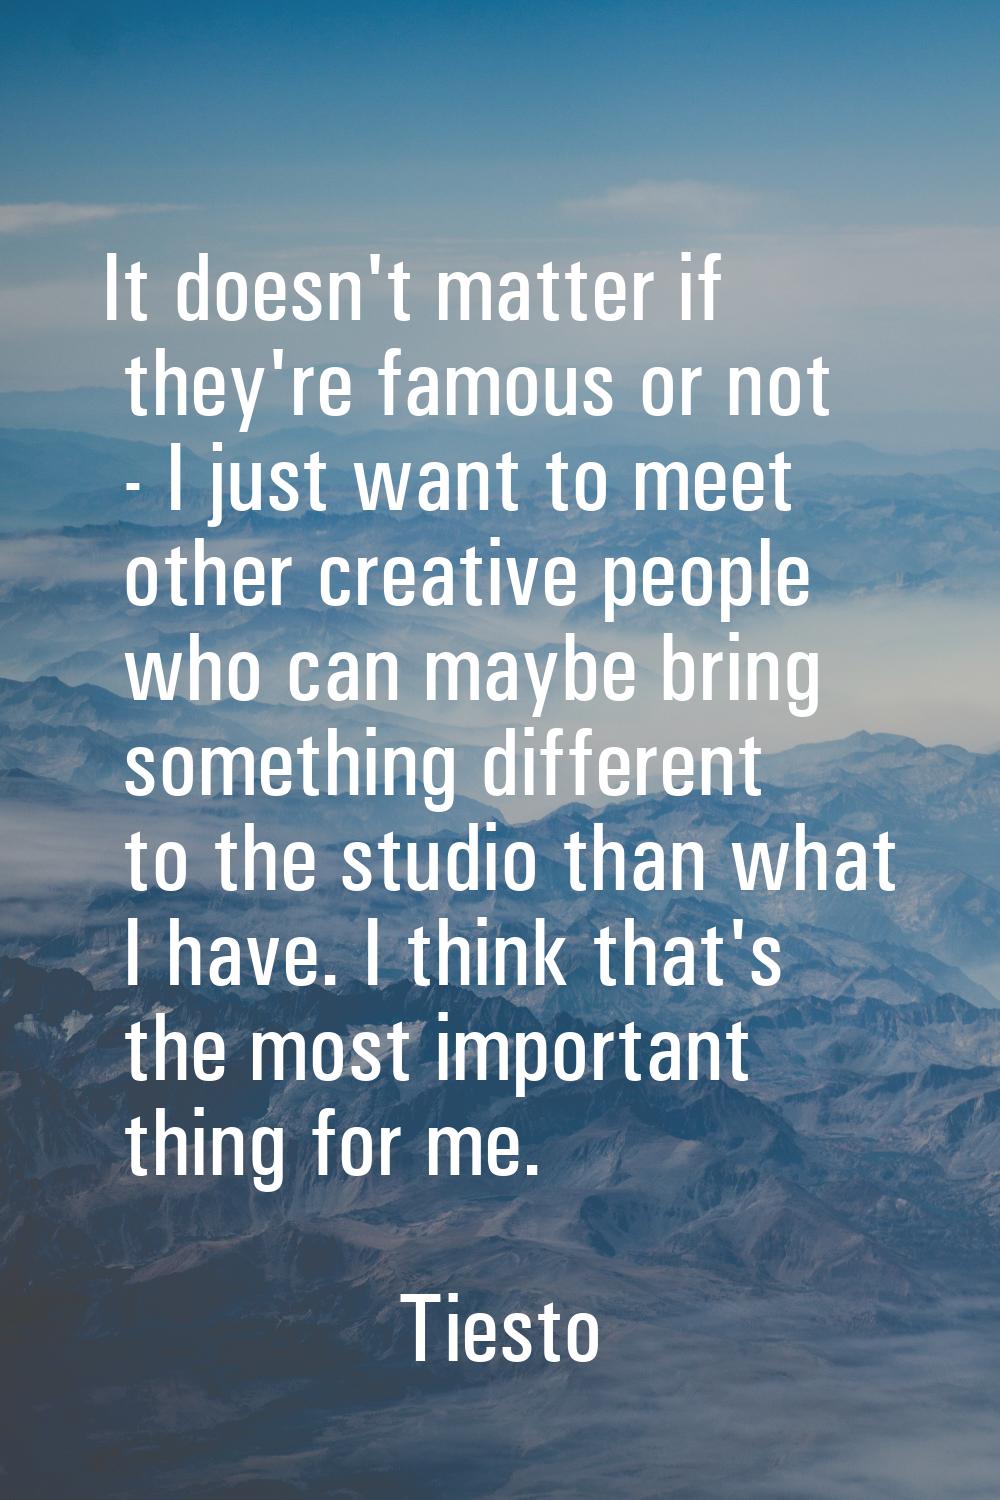 It doesn't matter if they're famous or not - I just want to meet other creative people who can mayb